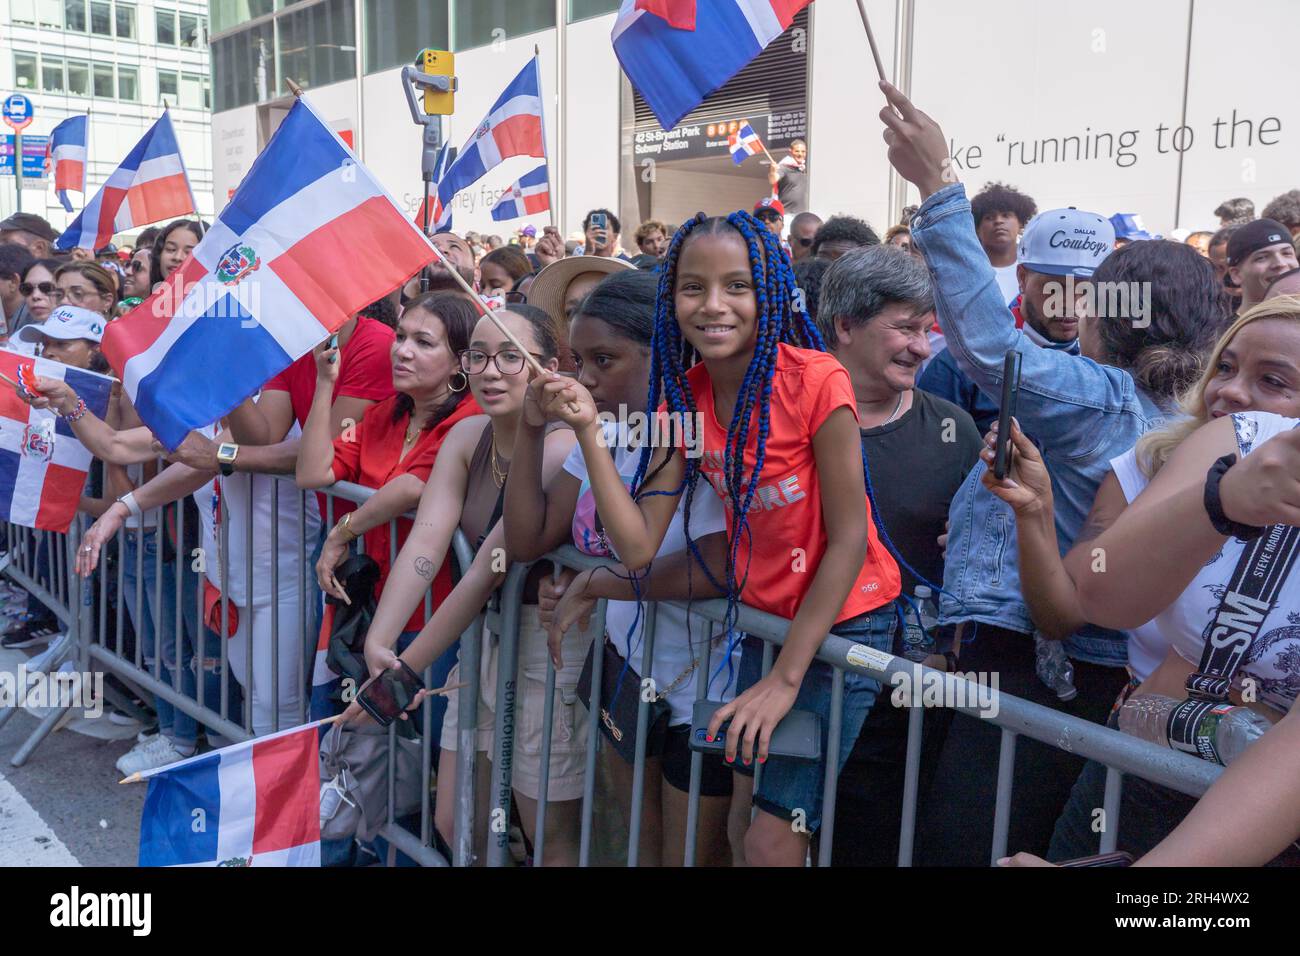 New York, United States. 13th Aug, 2023. NEW YORK, NEW YORK - AUGUST 13: Spectators with Dominican Republic flags watch the marchers at the Dominican Day Parade on 6th Avenue on August 13, 2023 in New York City. The National Dominican Day Parade celebrated 41 years of marching on Sixth Avenue in Manhattan. The parade celebrates Dominican culture, folklore, and traditions. Credit: Ron Adar/Alamy Live News Stock Photo